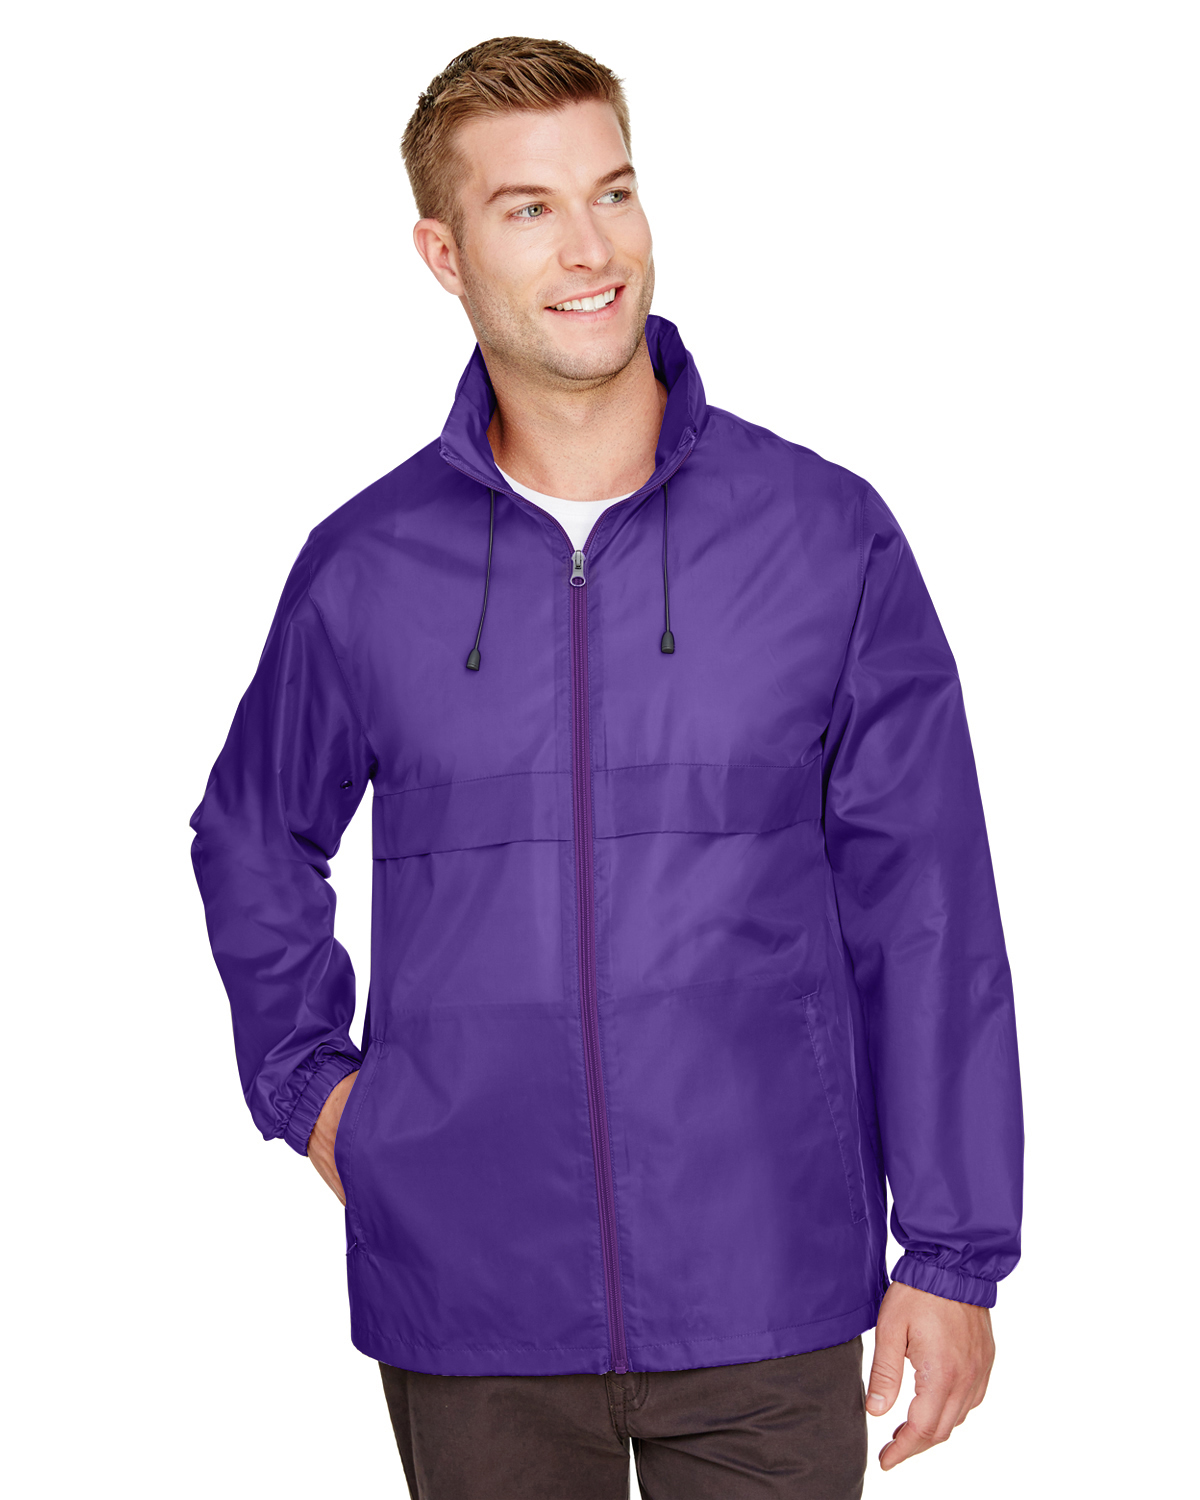 Team 365, The Adult Zone Protect Lightweight Jacket - SPORT PURPLE - XL - image 1 of 2